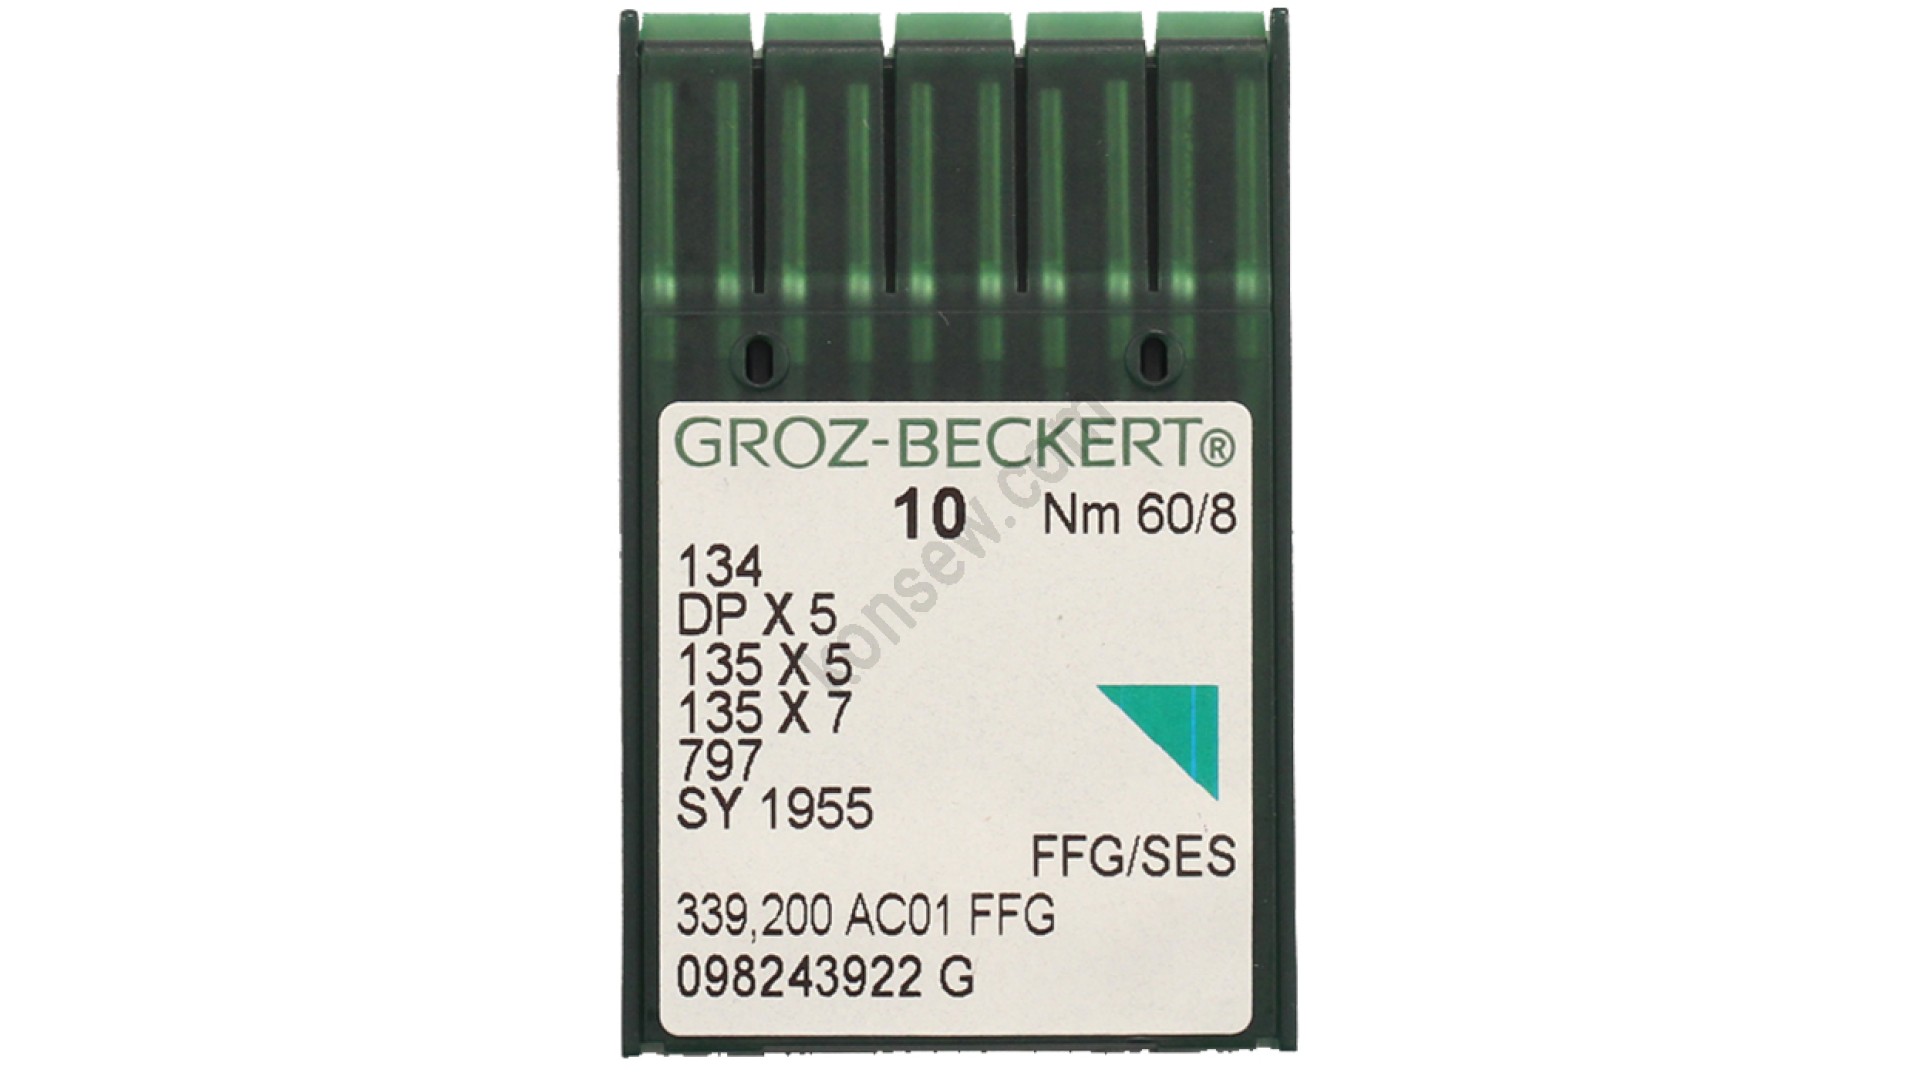 10 Groz-Beckert 134R 135X5 DPX5 SY1955 Industrial Sewing Machine Needles 